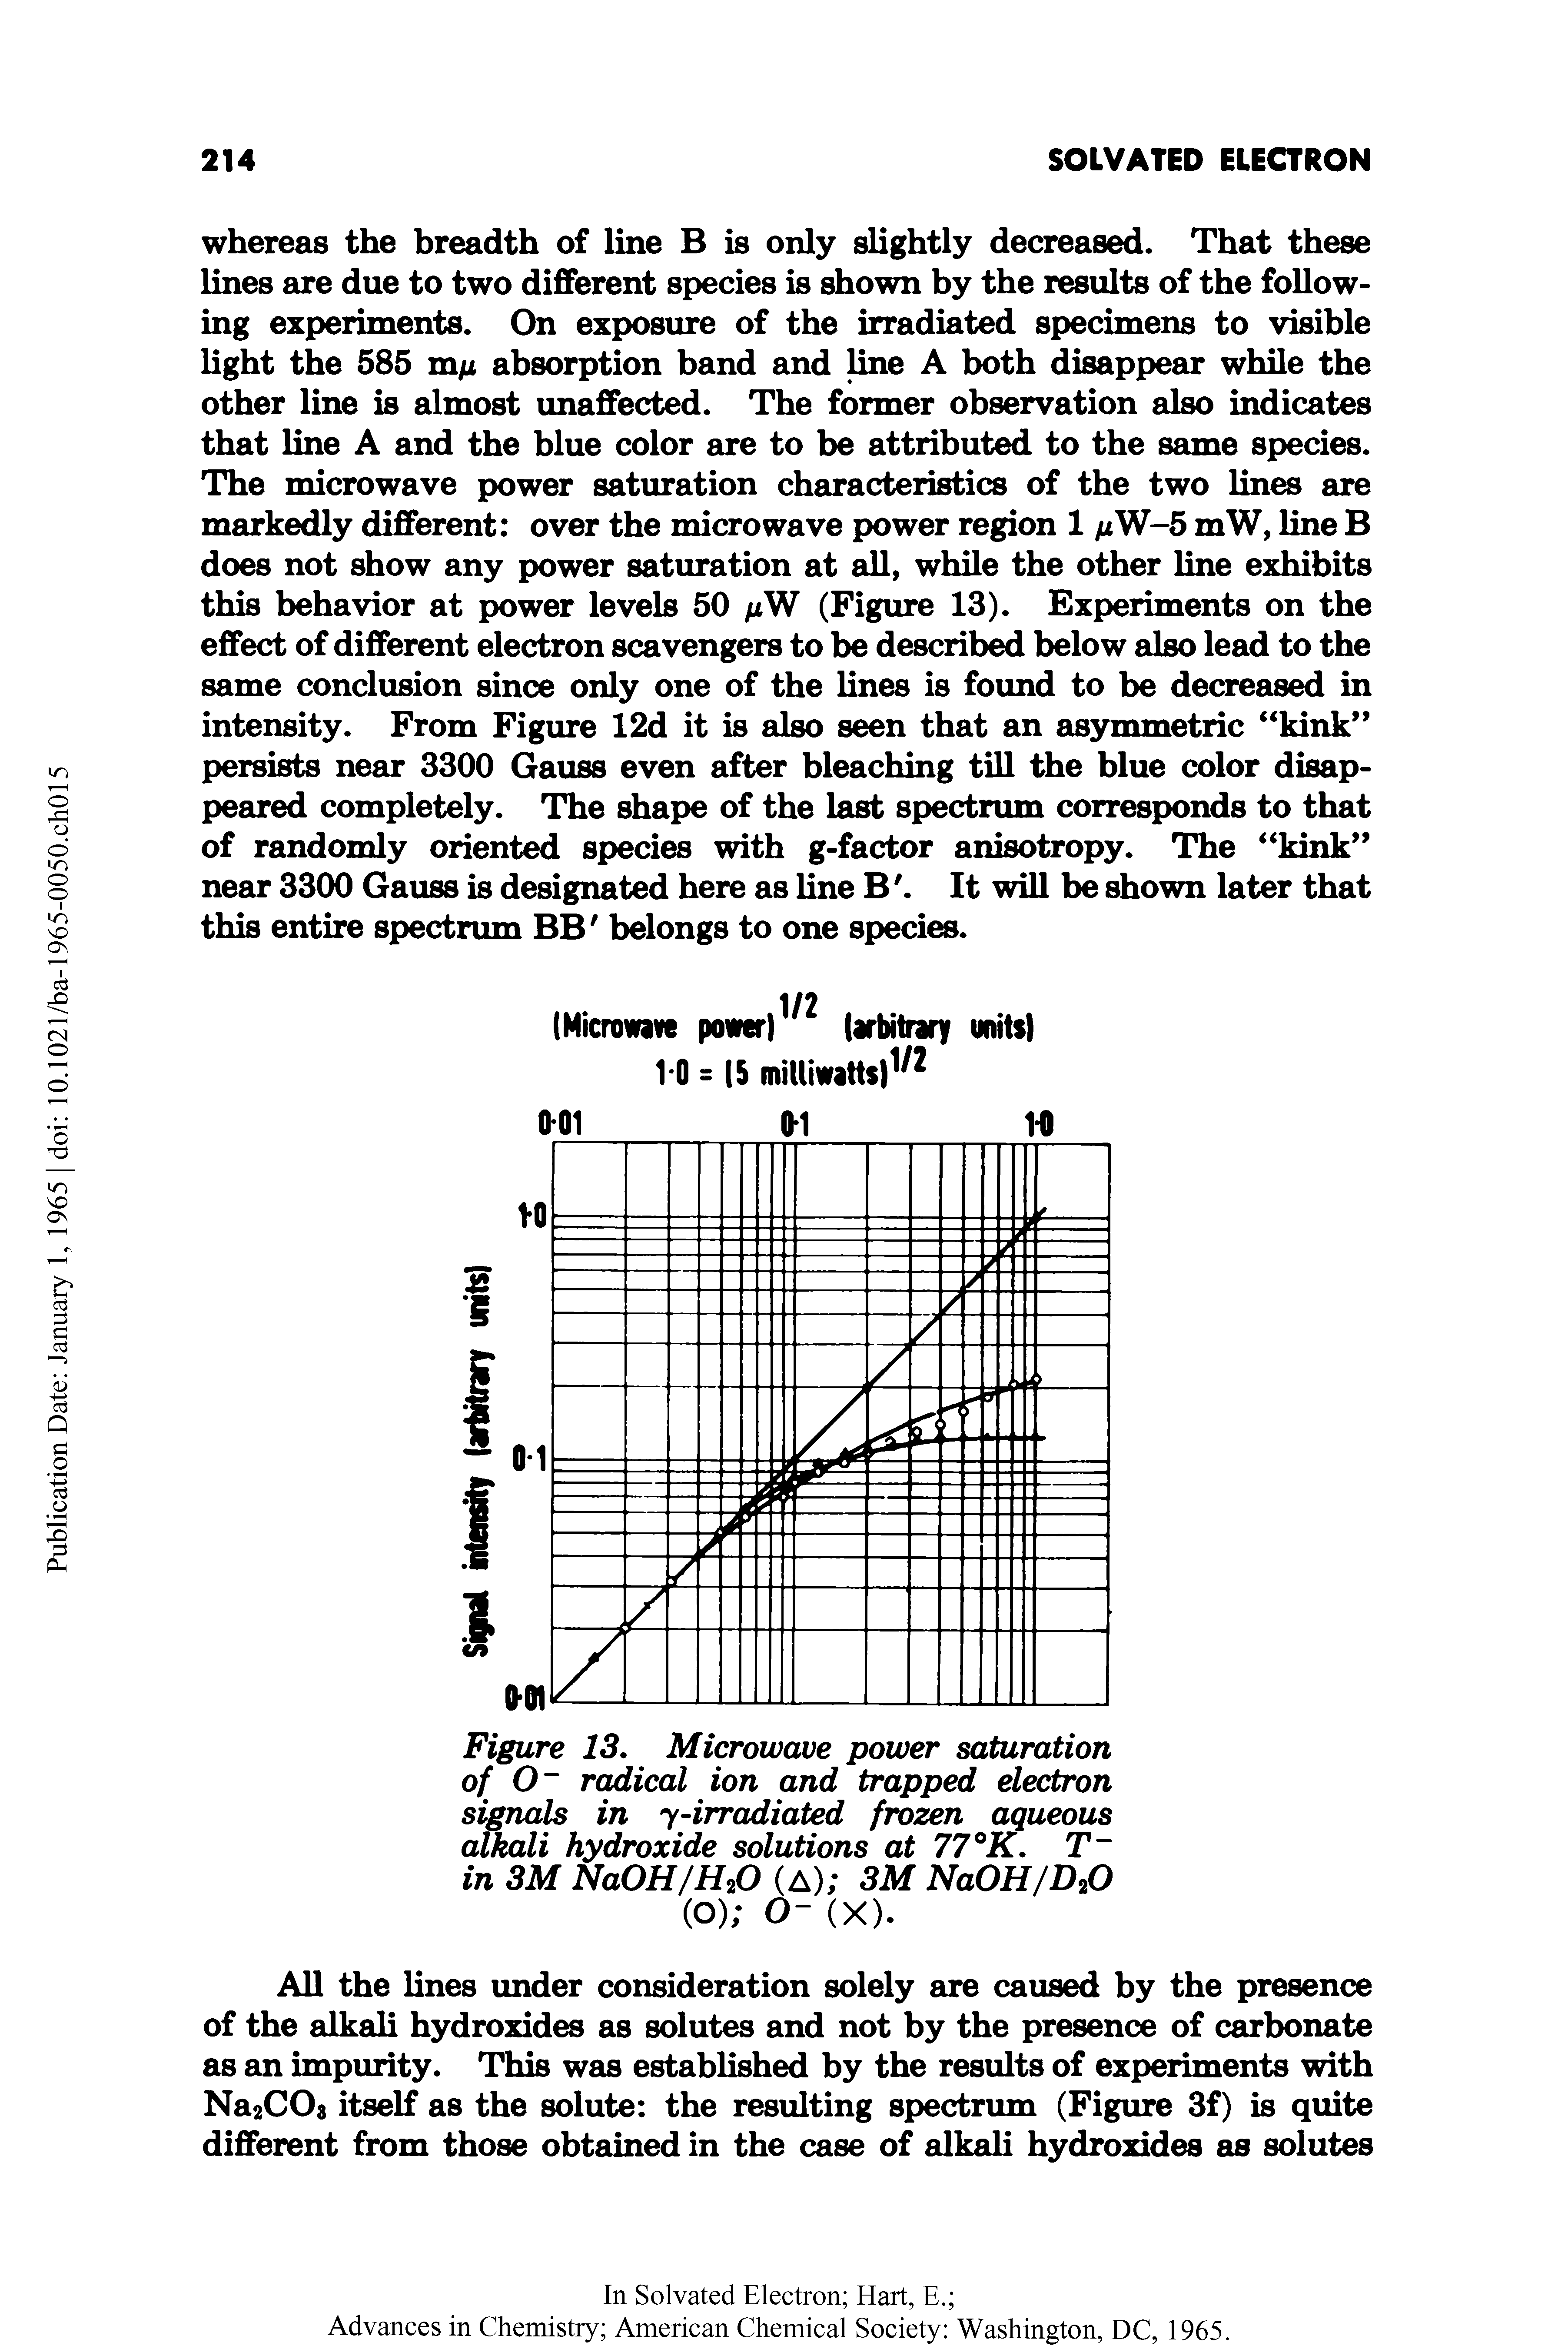 Figure 13. Microwave power saturation of 0 radical ion and trapped electron signals in y-irradiated frozen aqueous alkali hydroxide solutions at 77°K. T in 3M NaOH/H20 (A) 3M NaOH/D20 (O) O- (X).